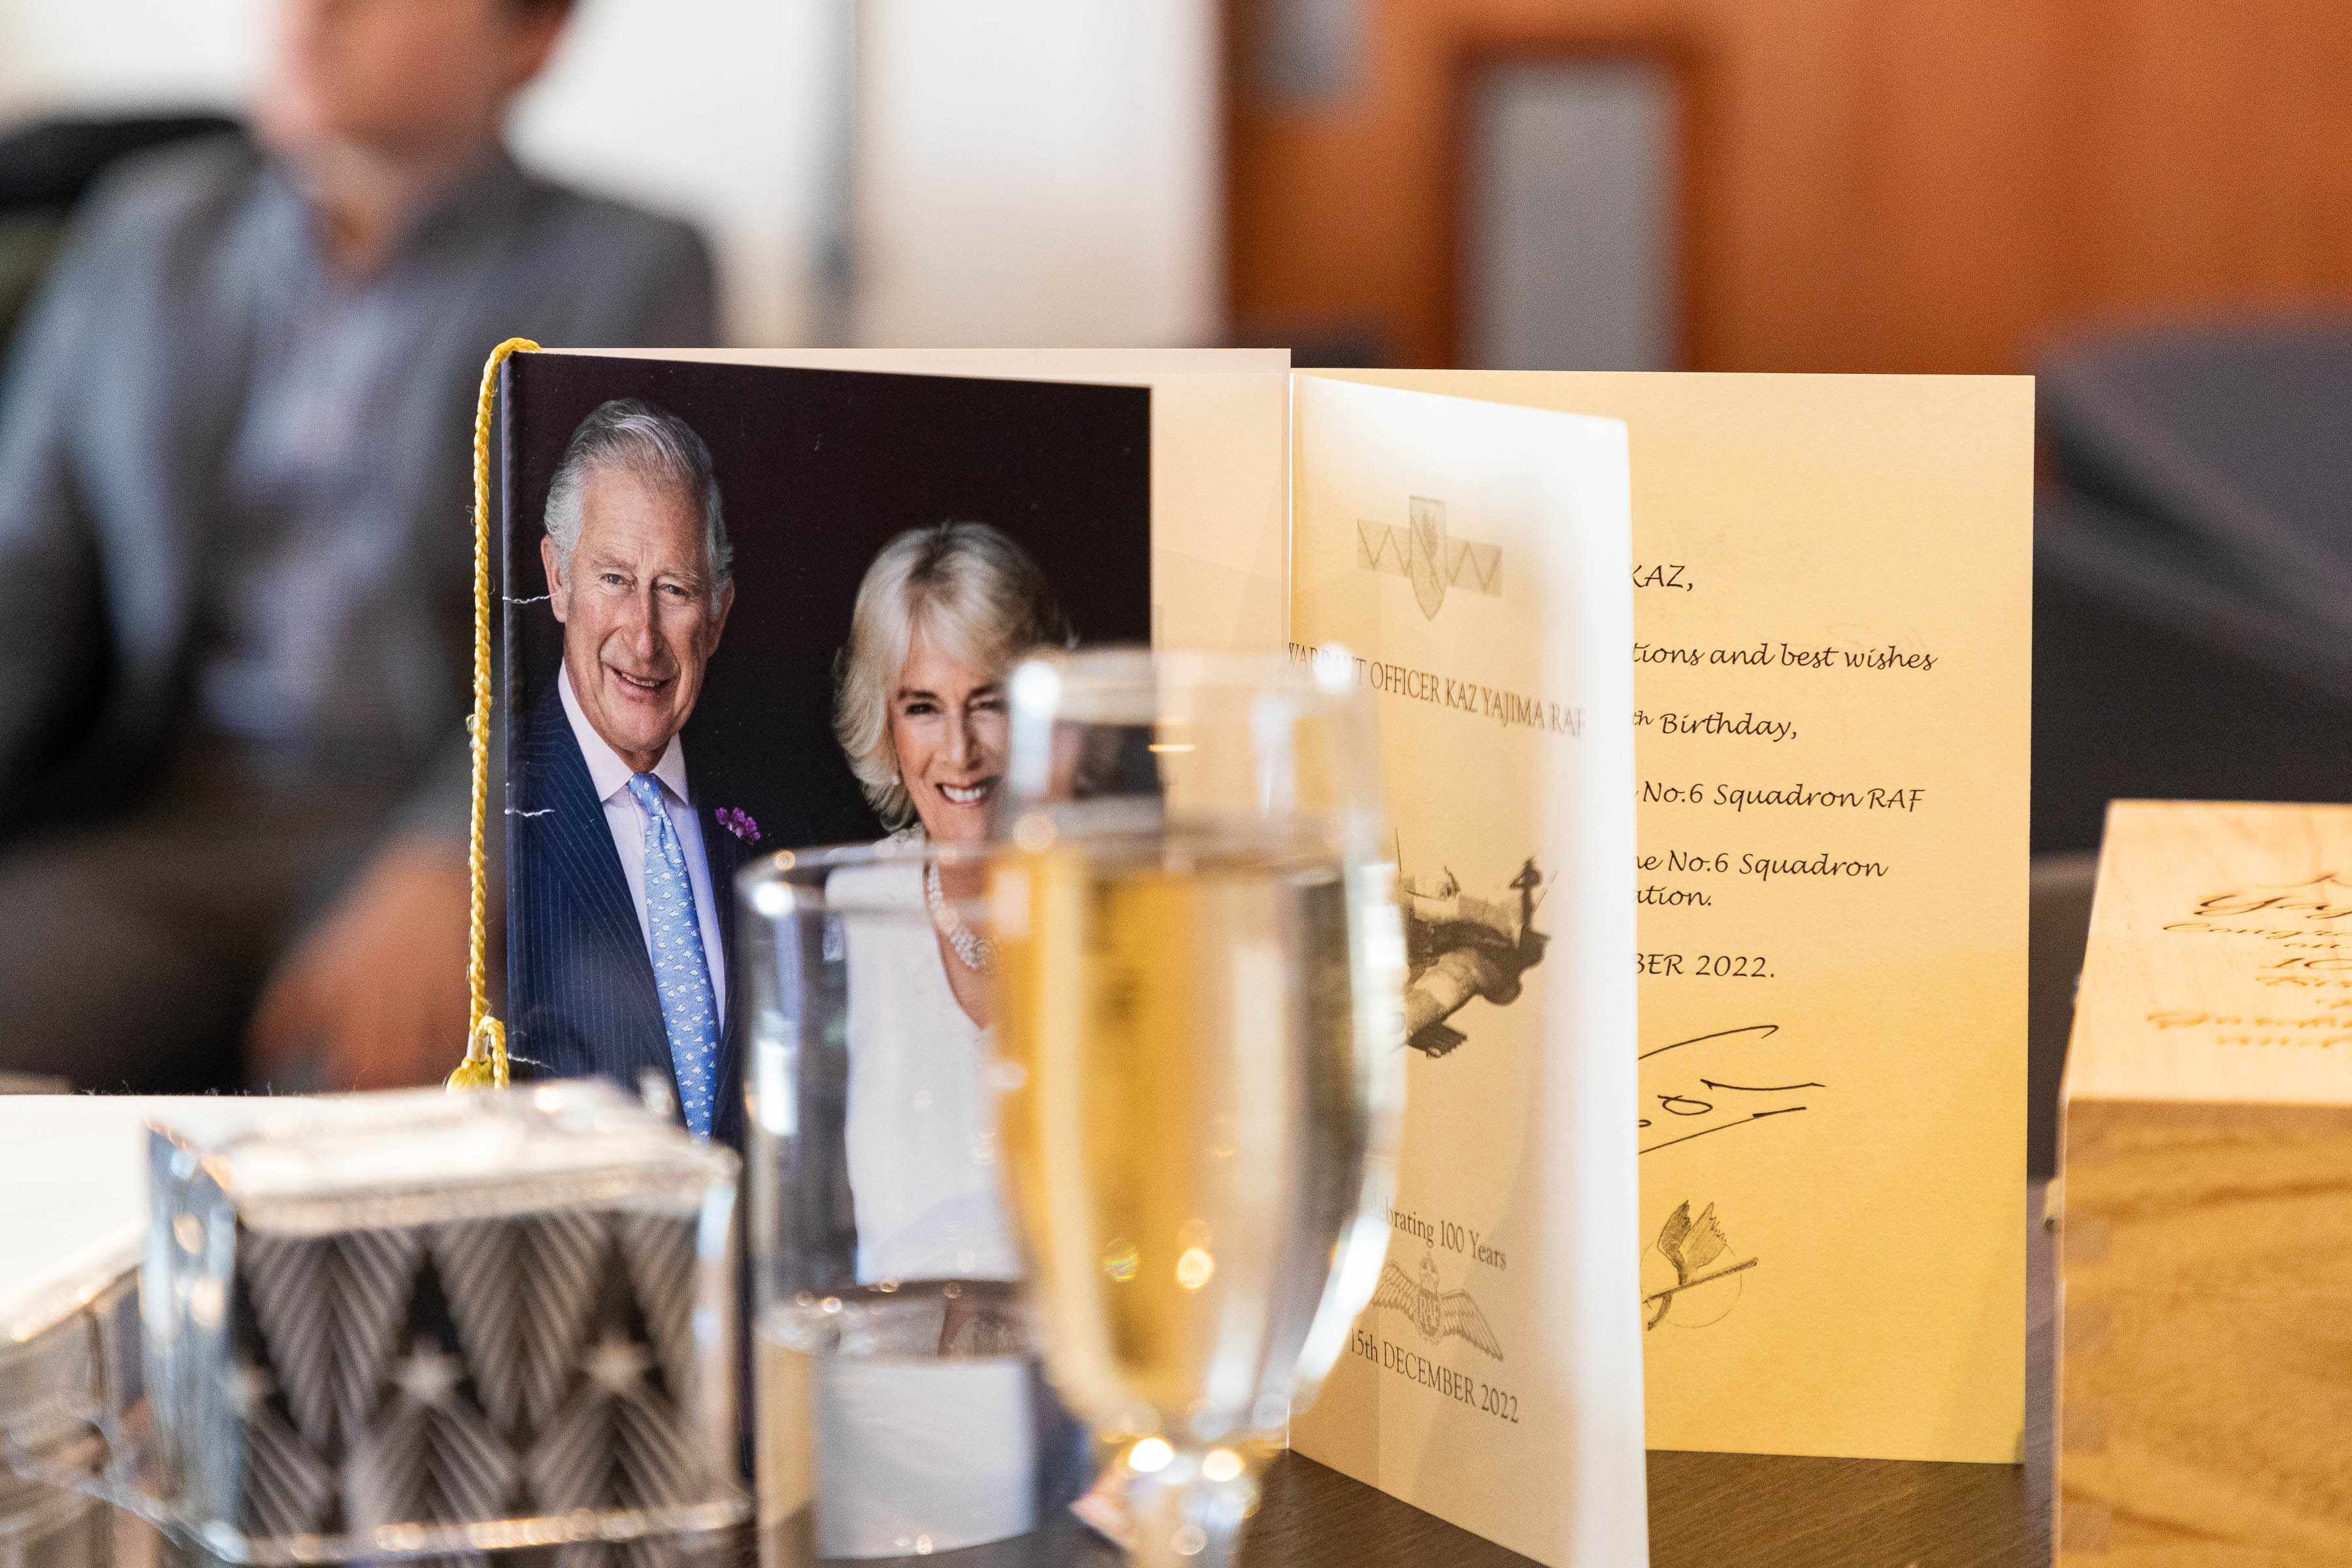 Image shows table with birthday card, a picture of His Majesty the King George the third and the Queen in consort Camilla.